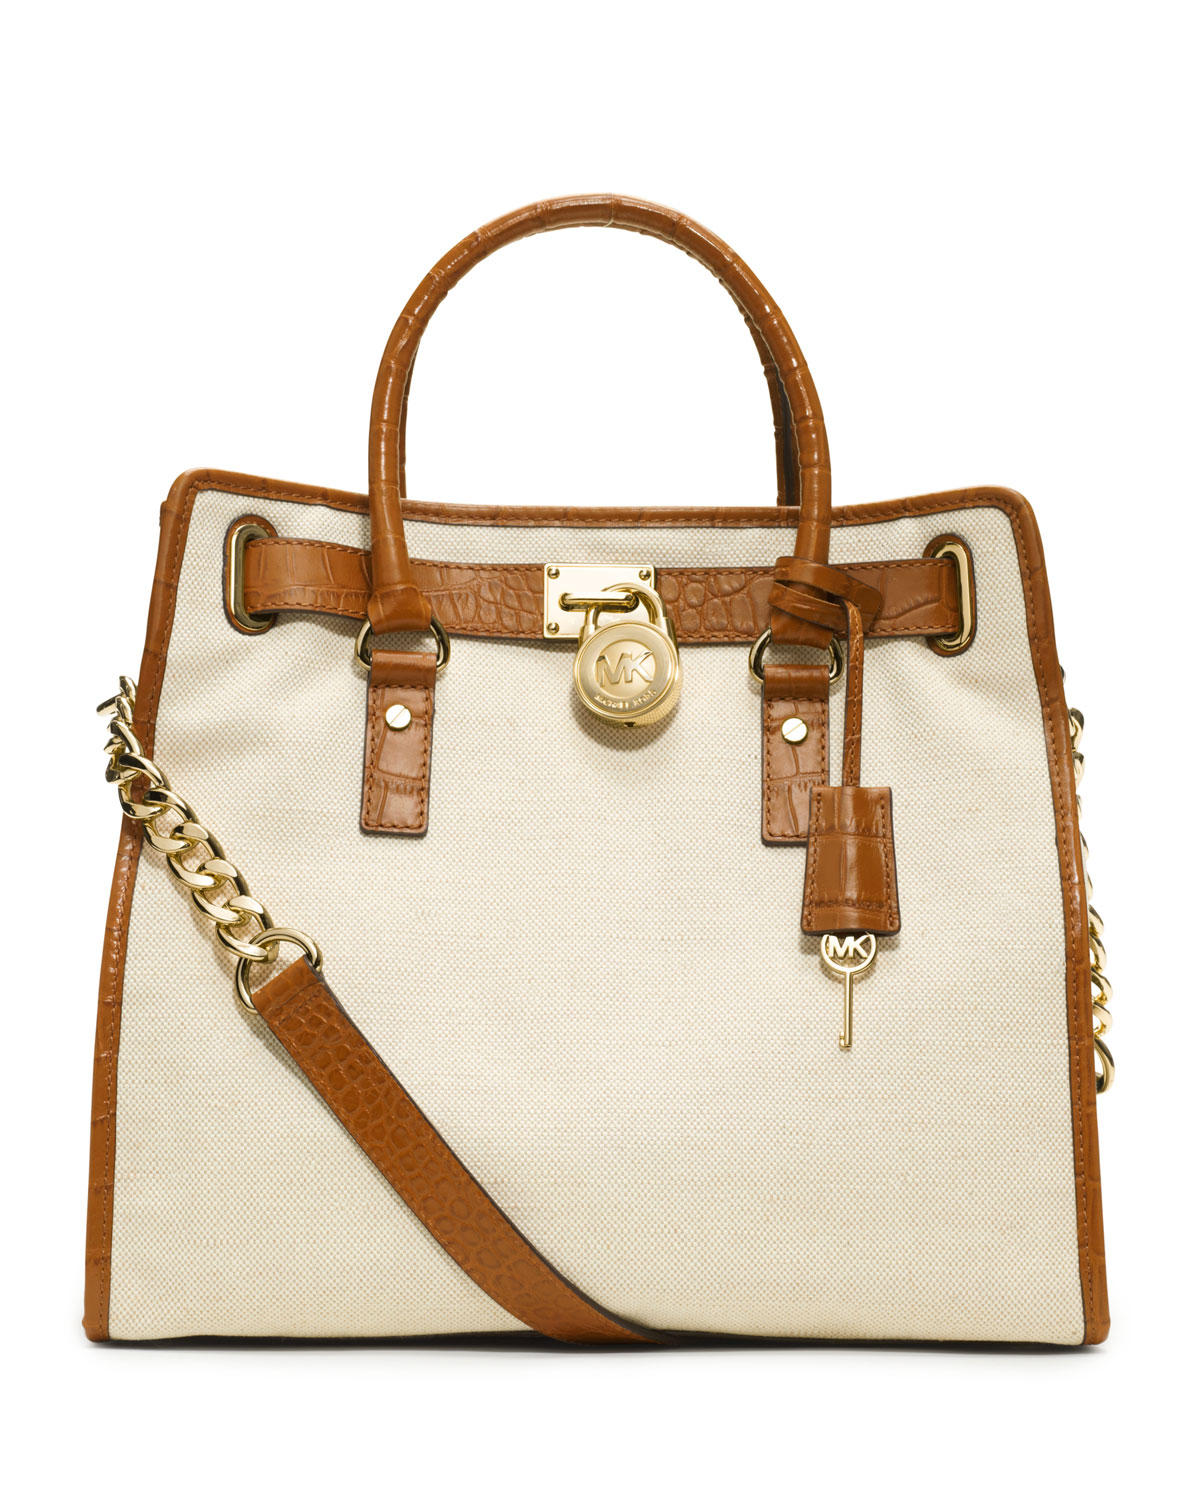 Lyst - Michael Kors Large Hamilton Canvas Tote in Natural